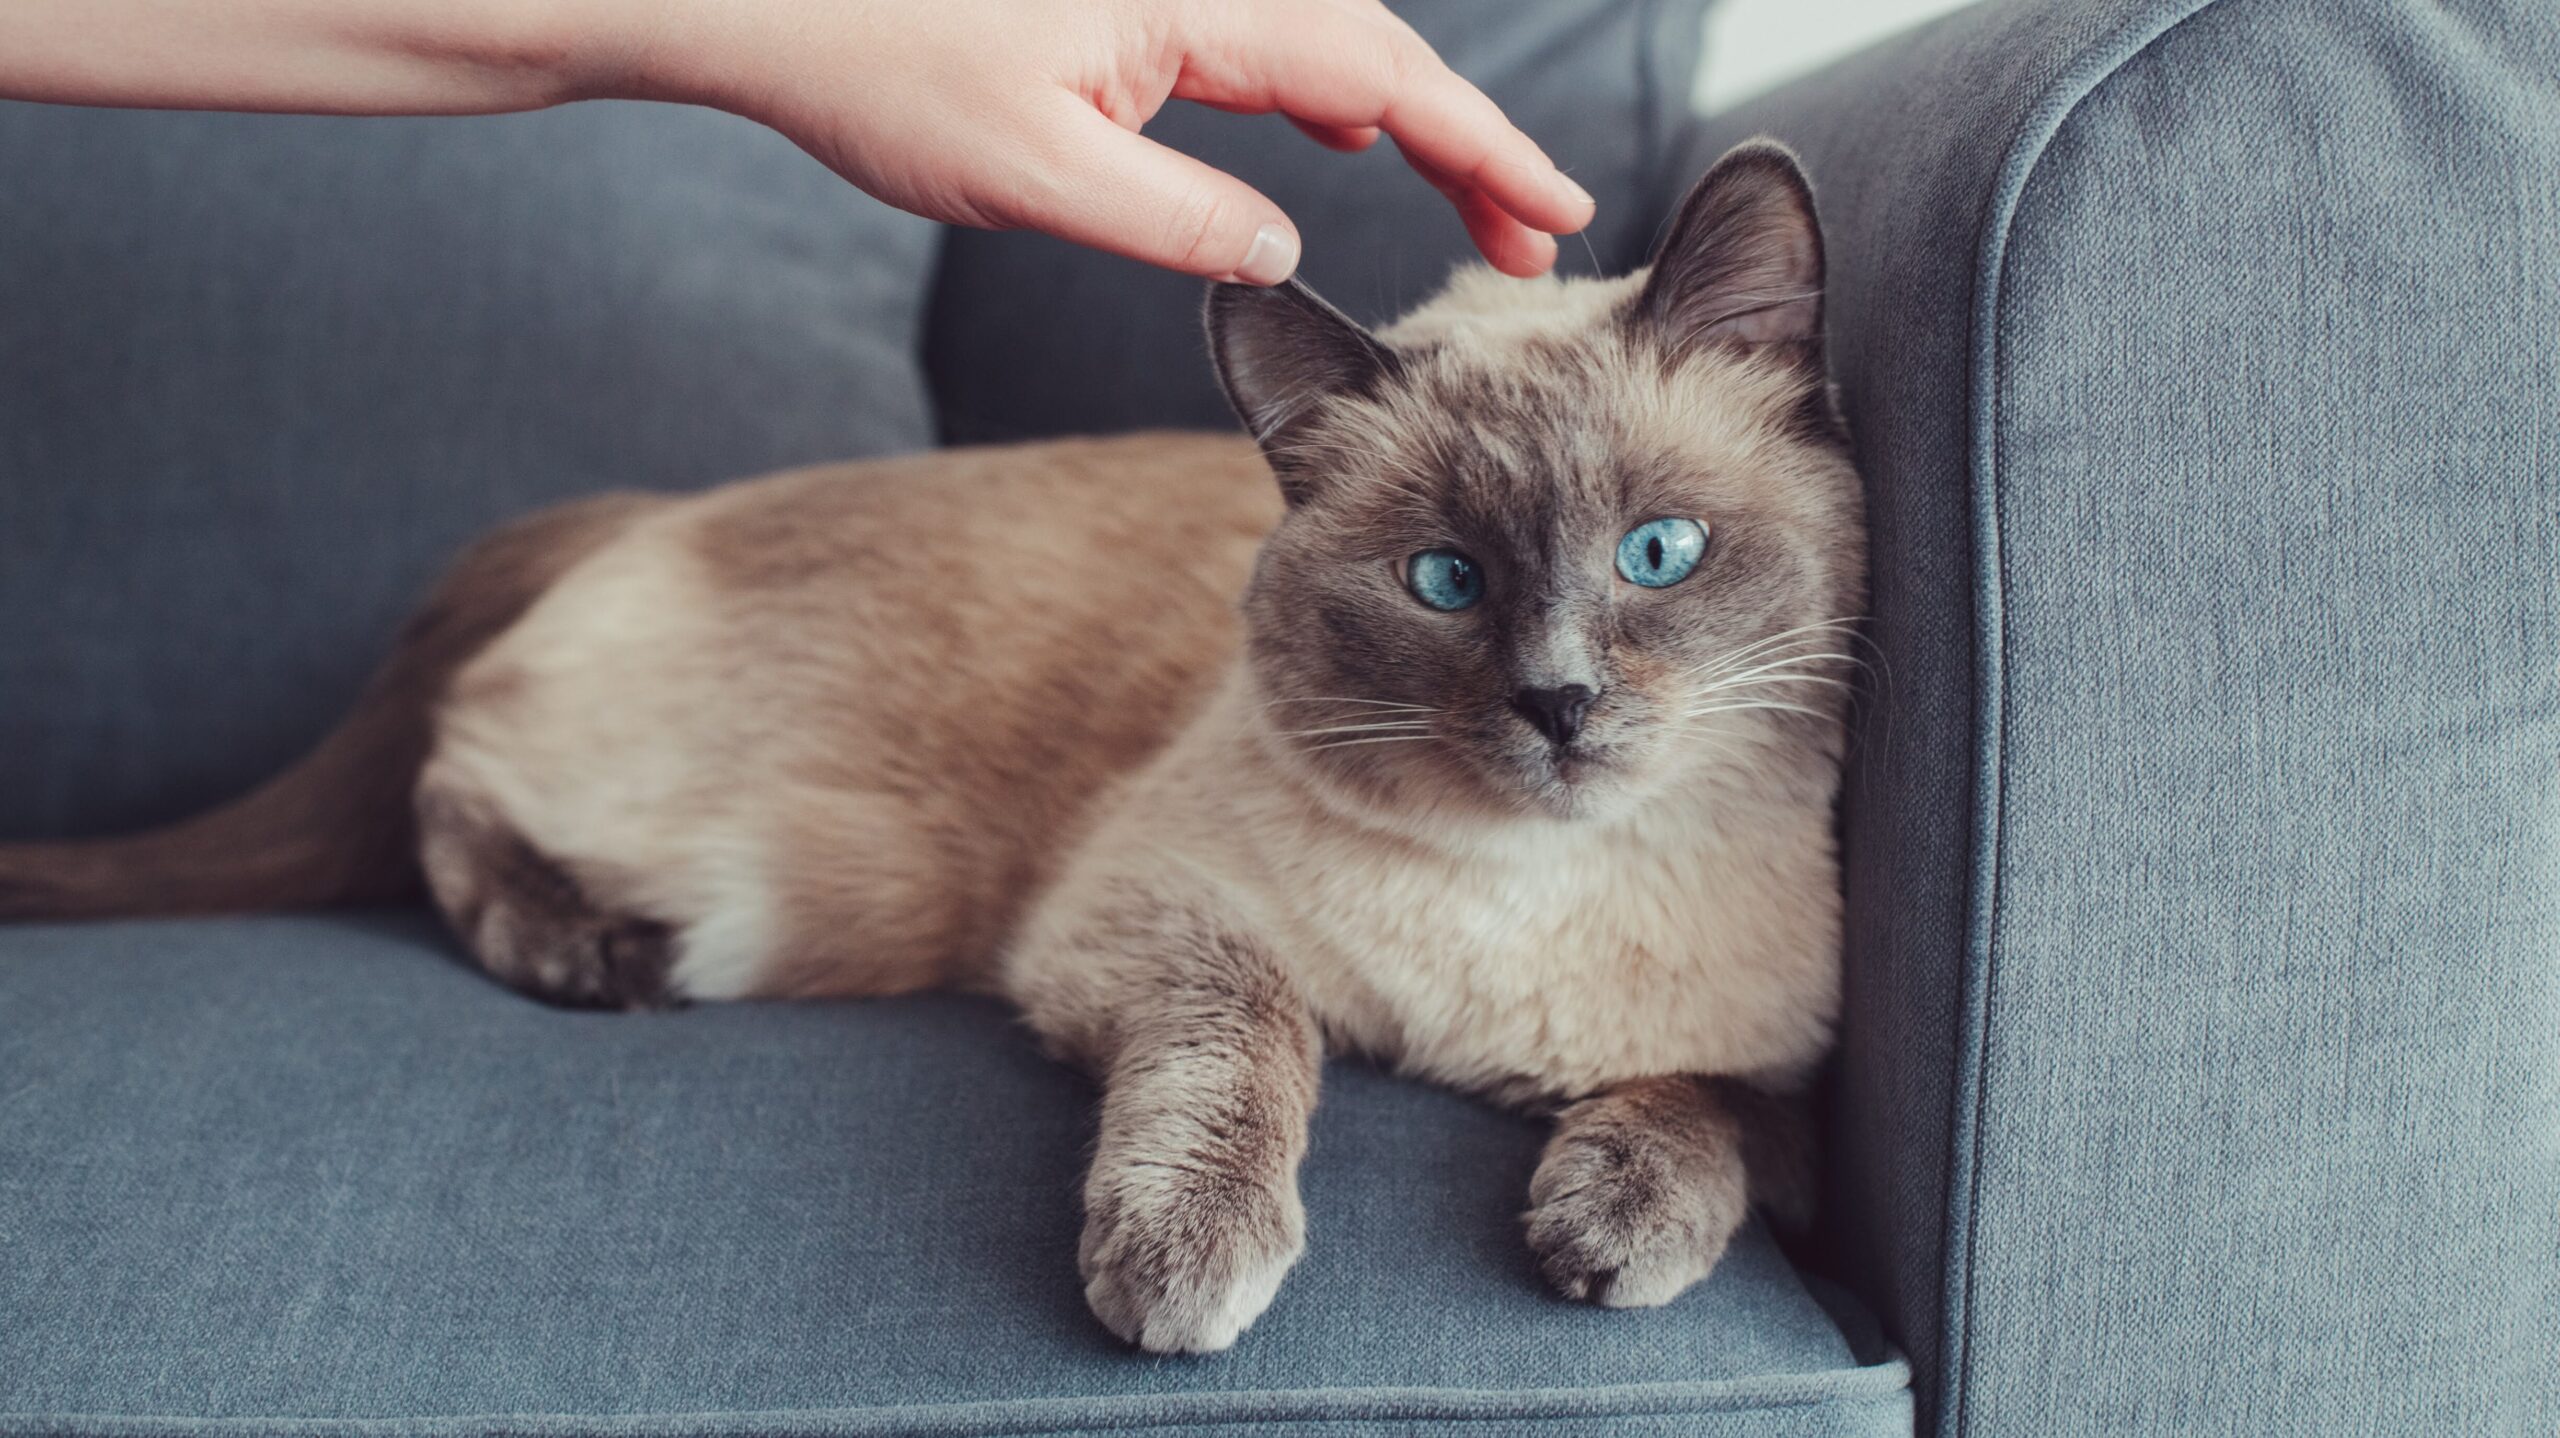 Beautiful colorpoint blue-eyed cat lying on couch sofa. Owner petting touching fluffy hairy domestic pet with blue eyes. Cute adorable feline kitten is stroked by man hand. Person eases stress